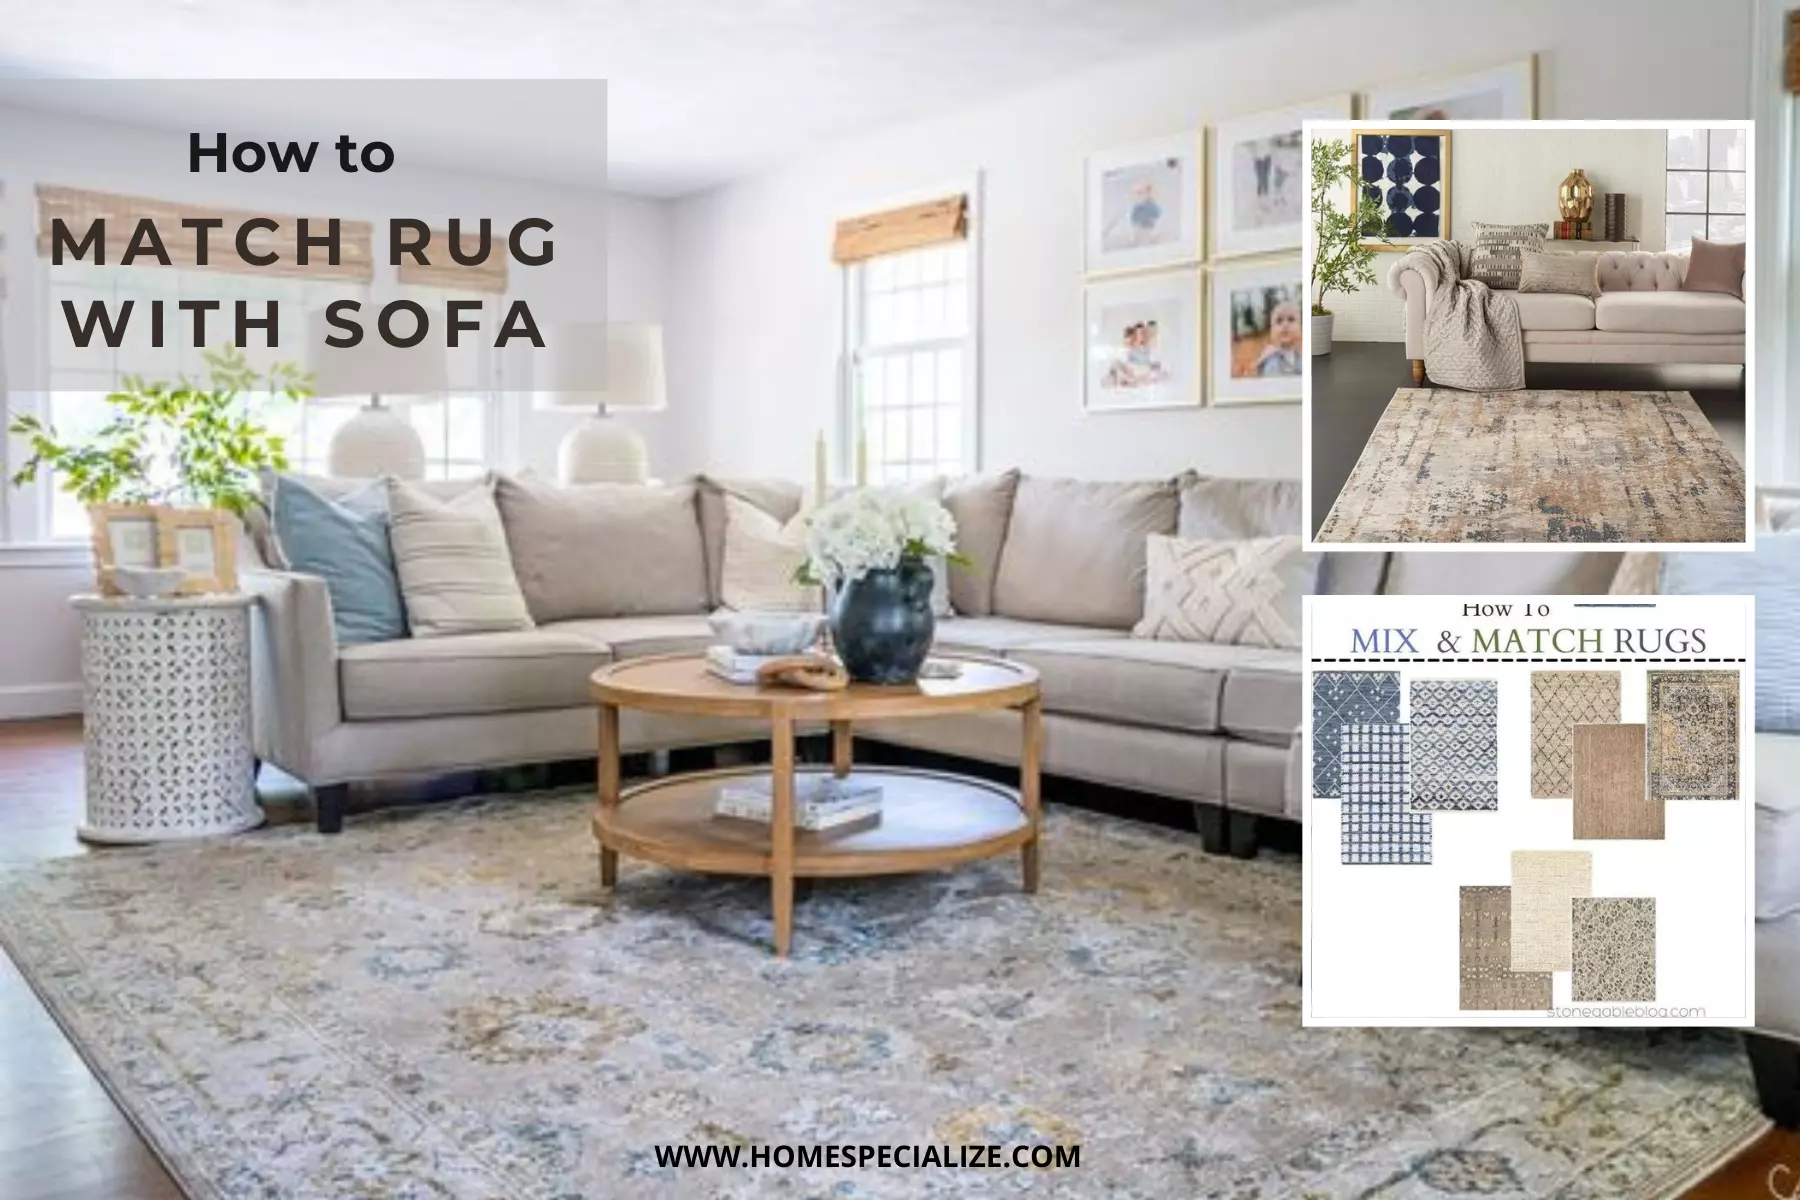 How to Match Rug with Sofa